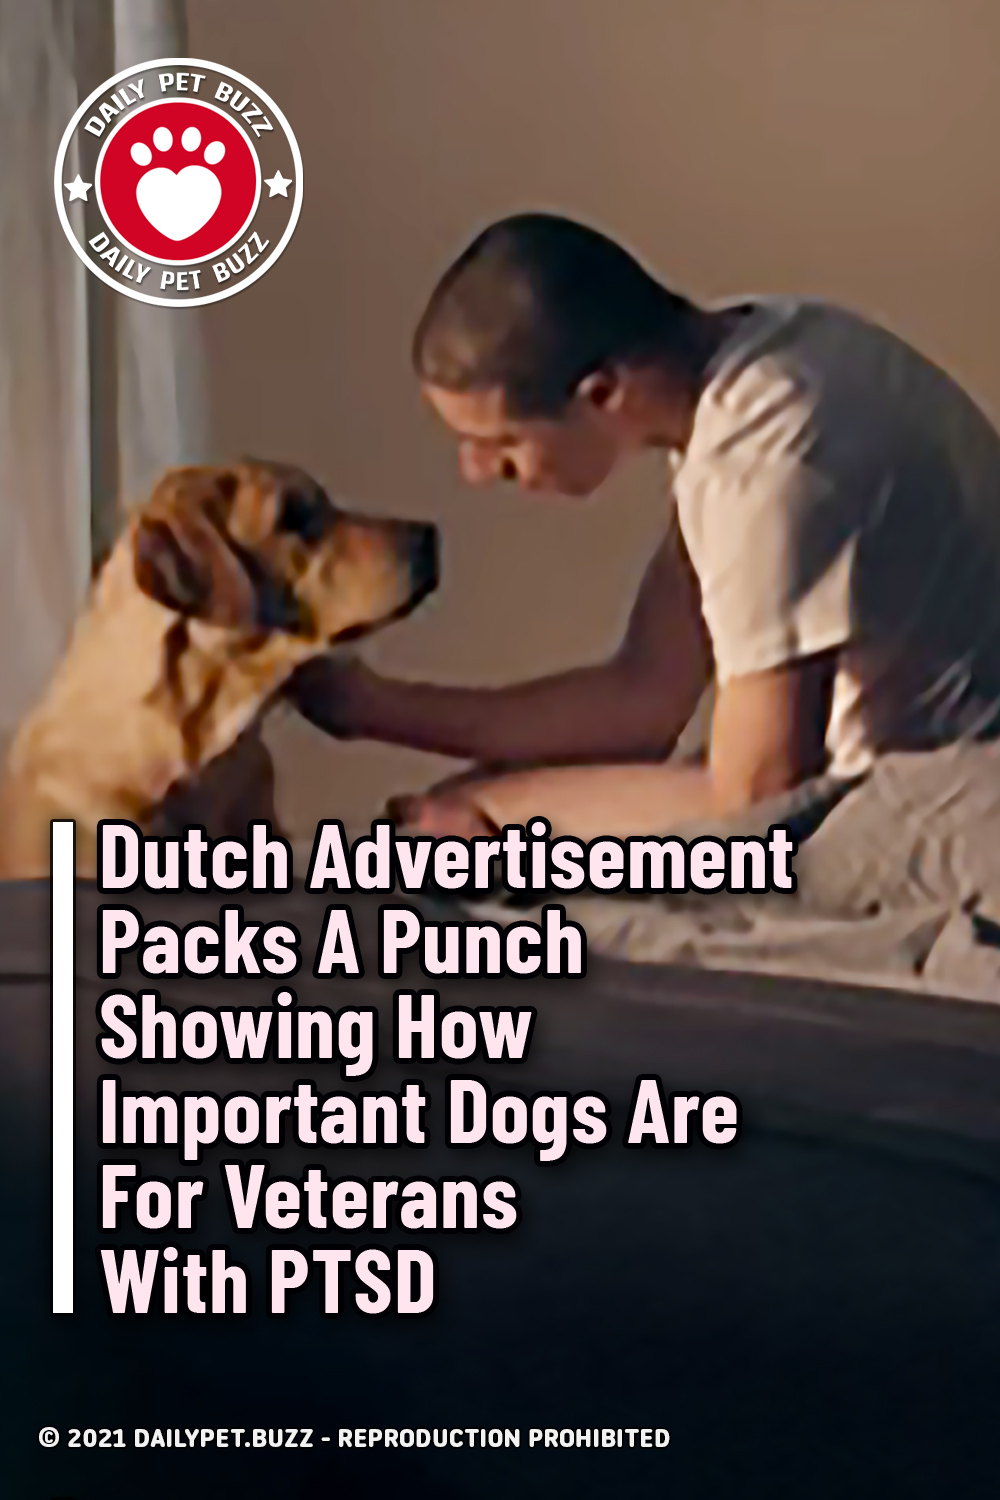 Dutch Advertisement Packs A Punch Showing How Important Dogs Are For Veterans With PTSD